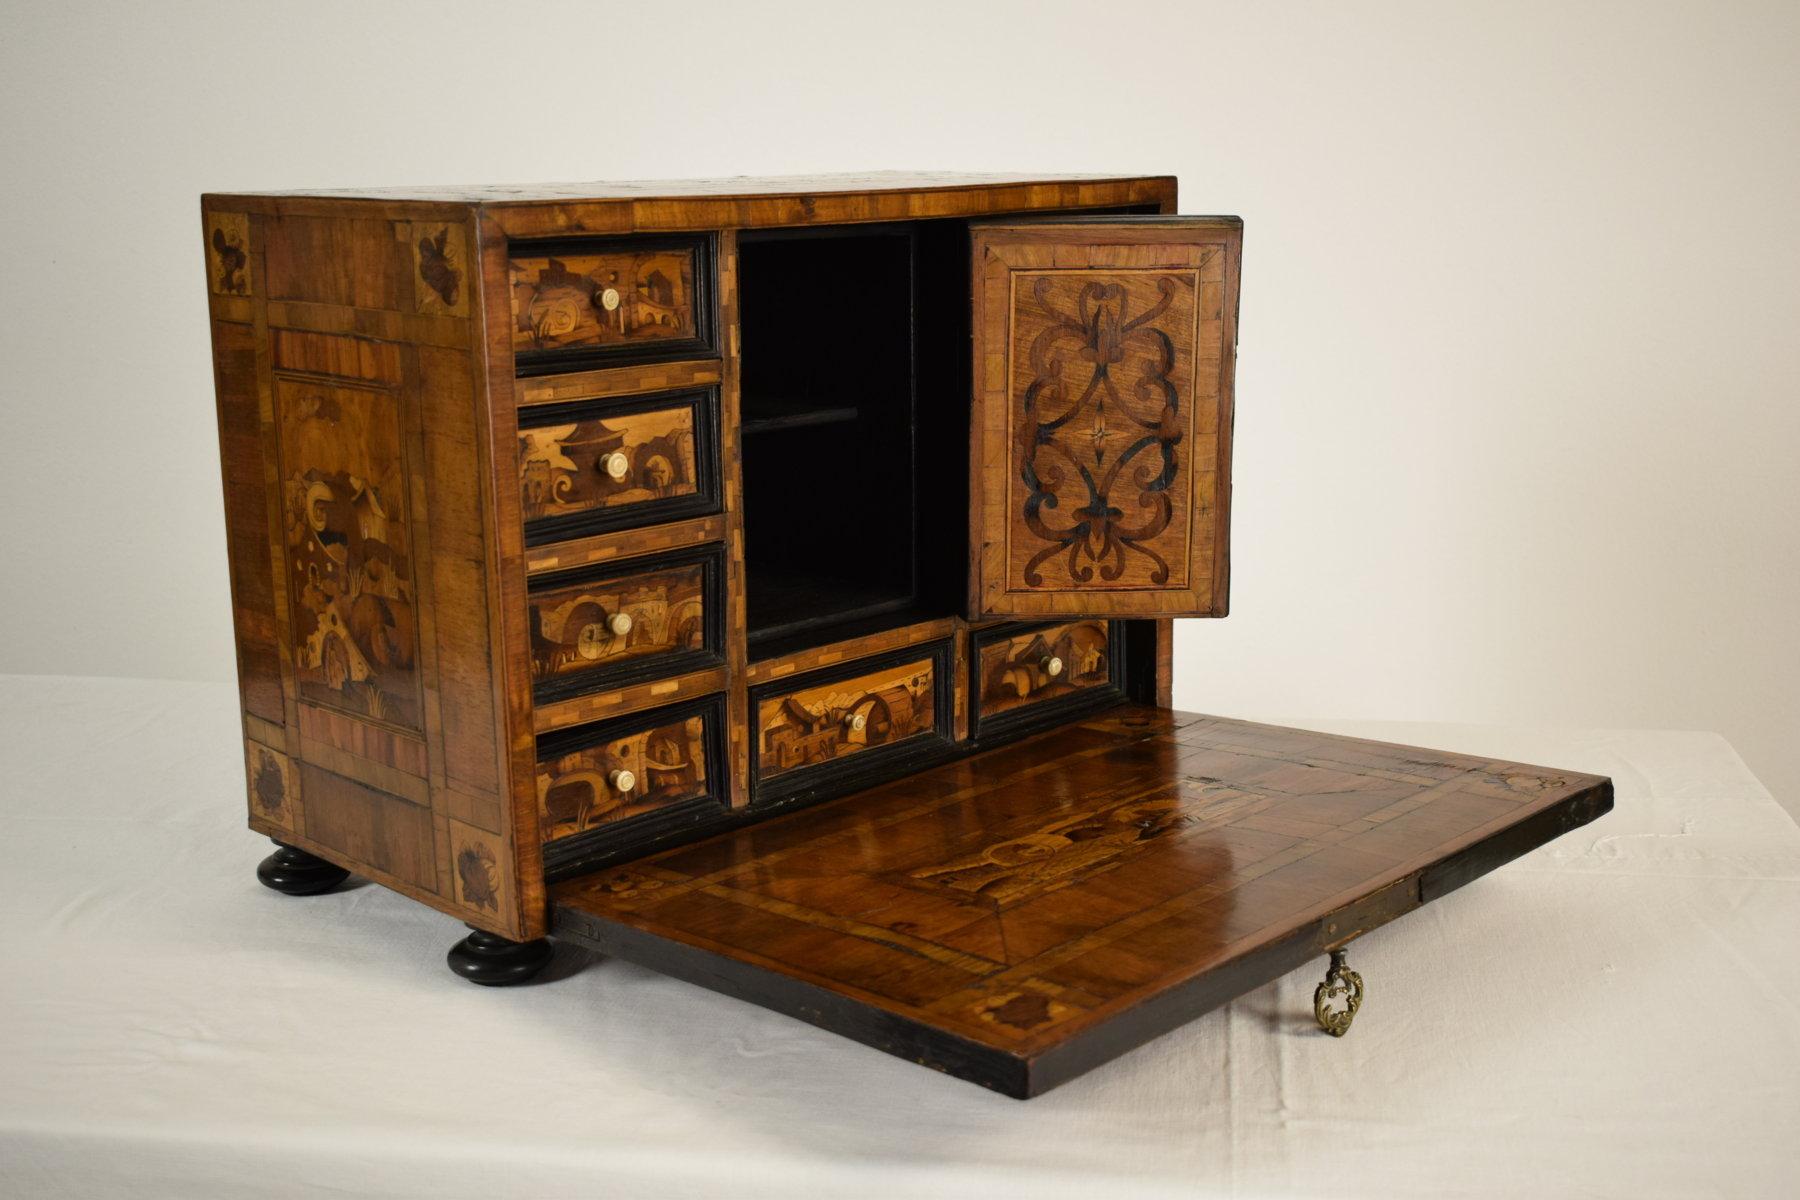  17th Century, German Wood Apothecary Cabinet with Fantasy Architectures For Sale 3